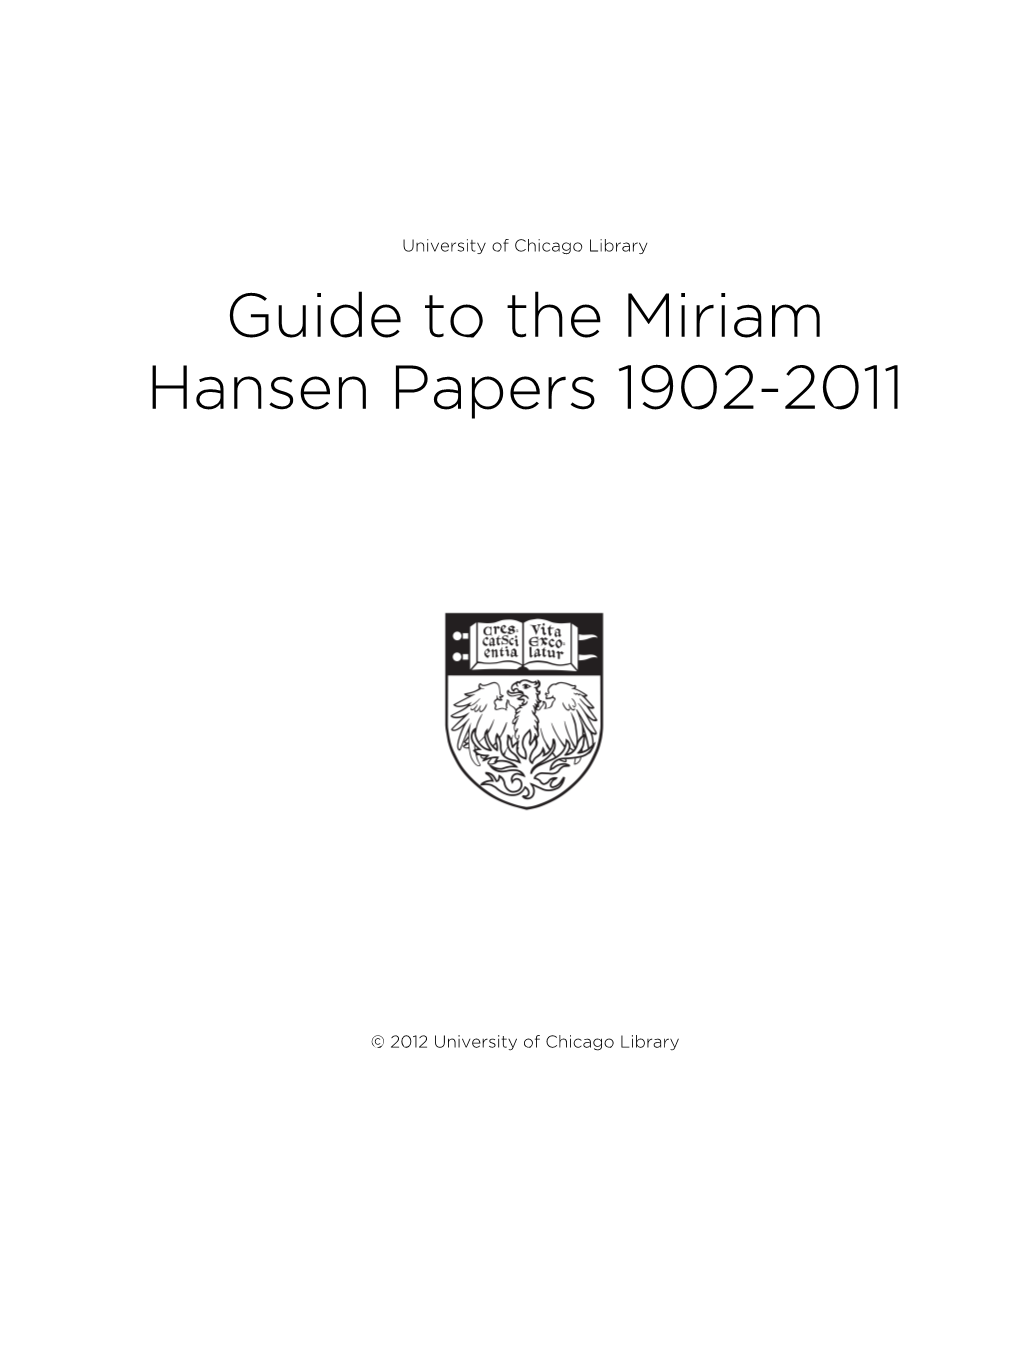 Guide to the Miriam Hansen Papers 1902-2011